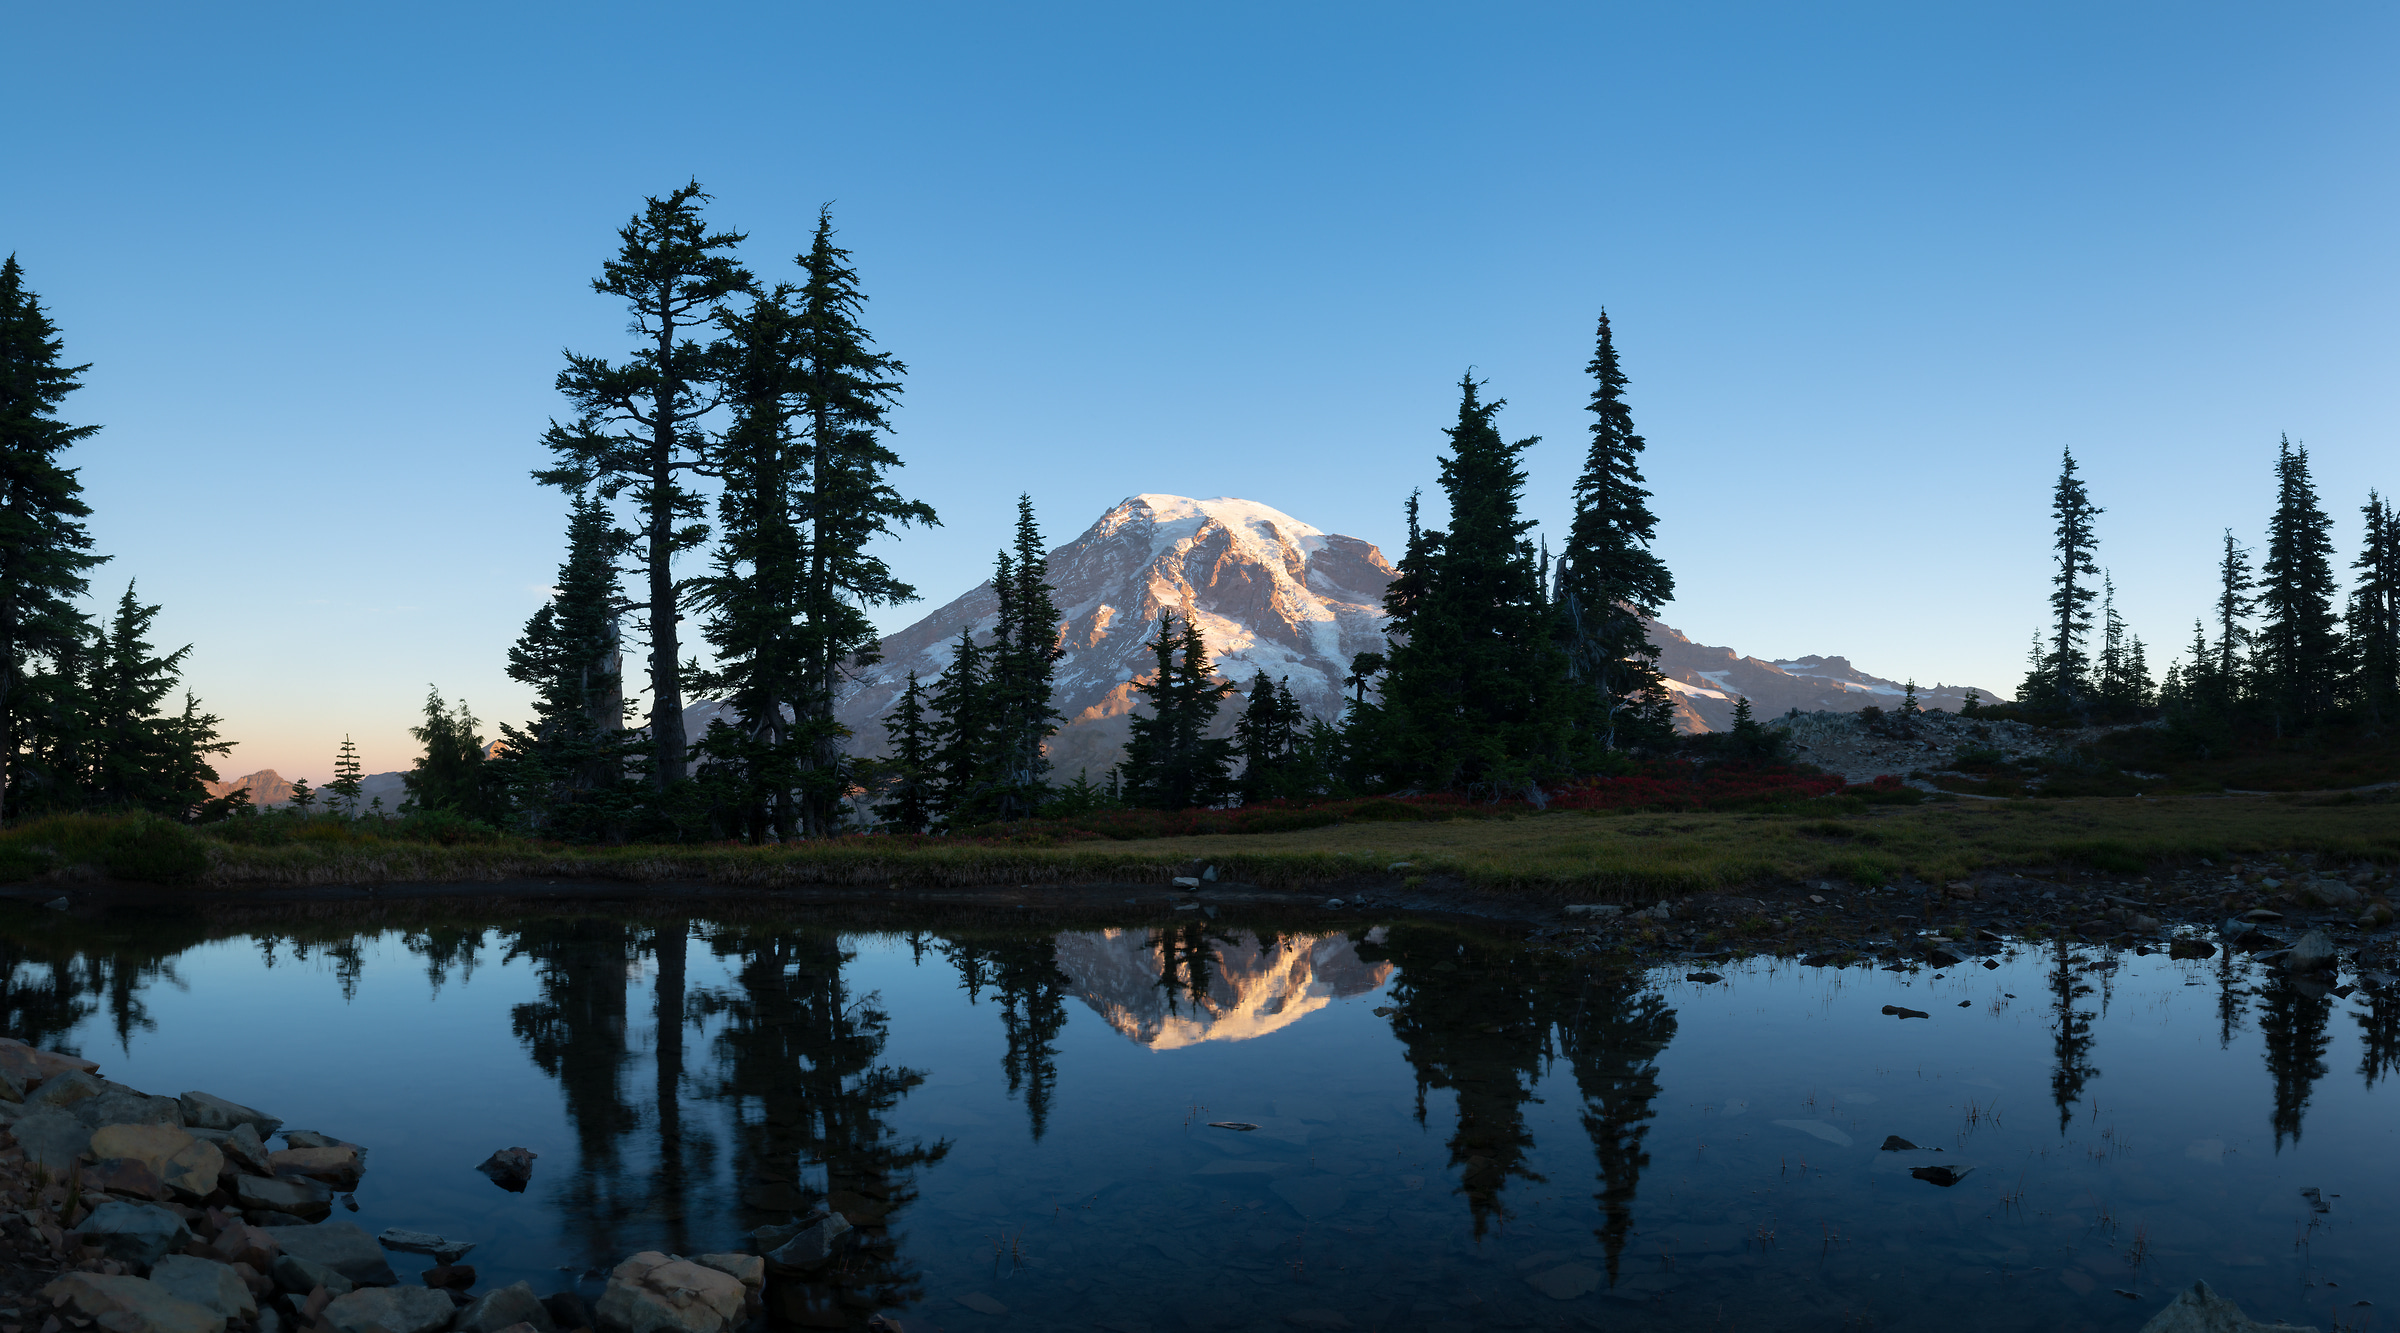 171 megapixels! A very high resolution, large-format VAST photo print of Mt. Rainier and a lake; landscape photograph created by Greg Probst in Mt. Rainier National Park, Washington.